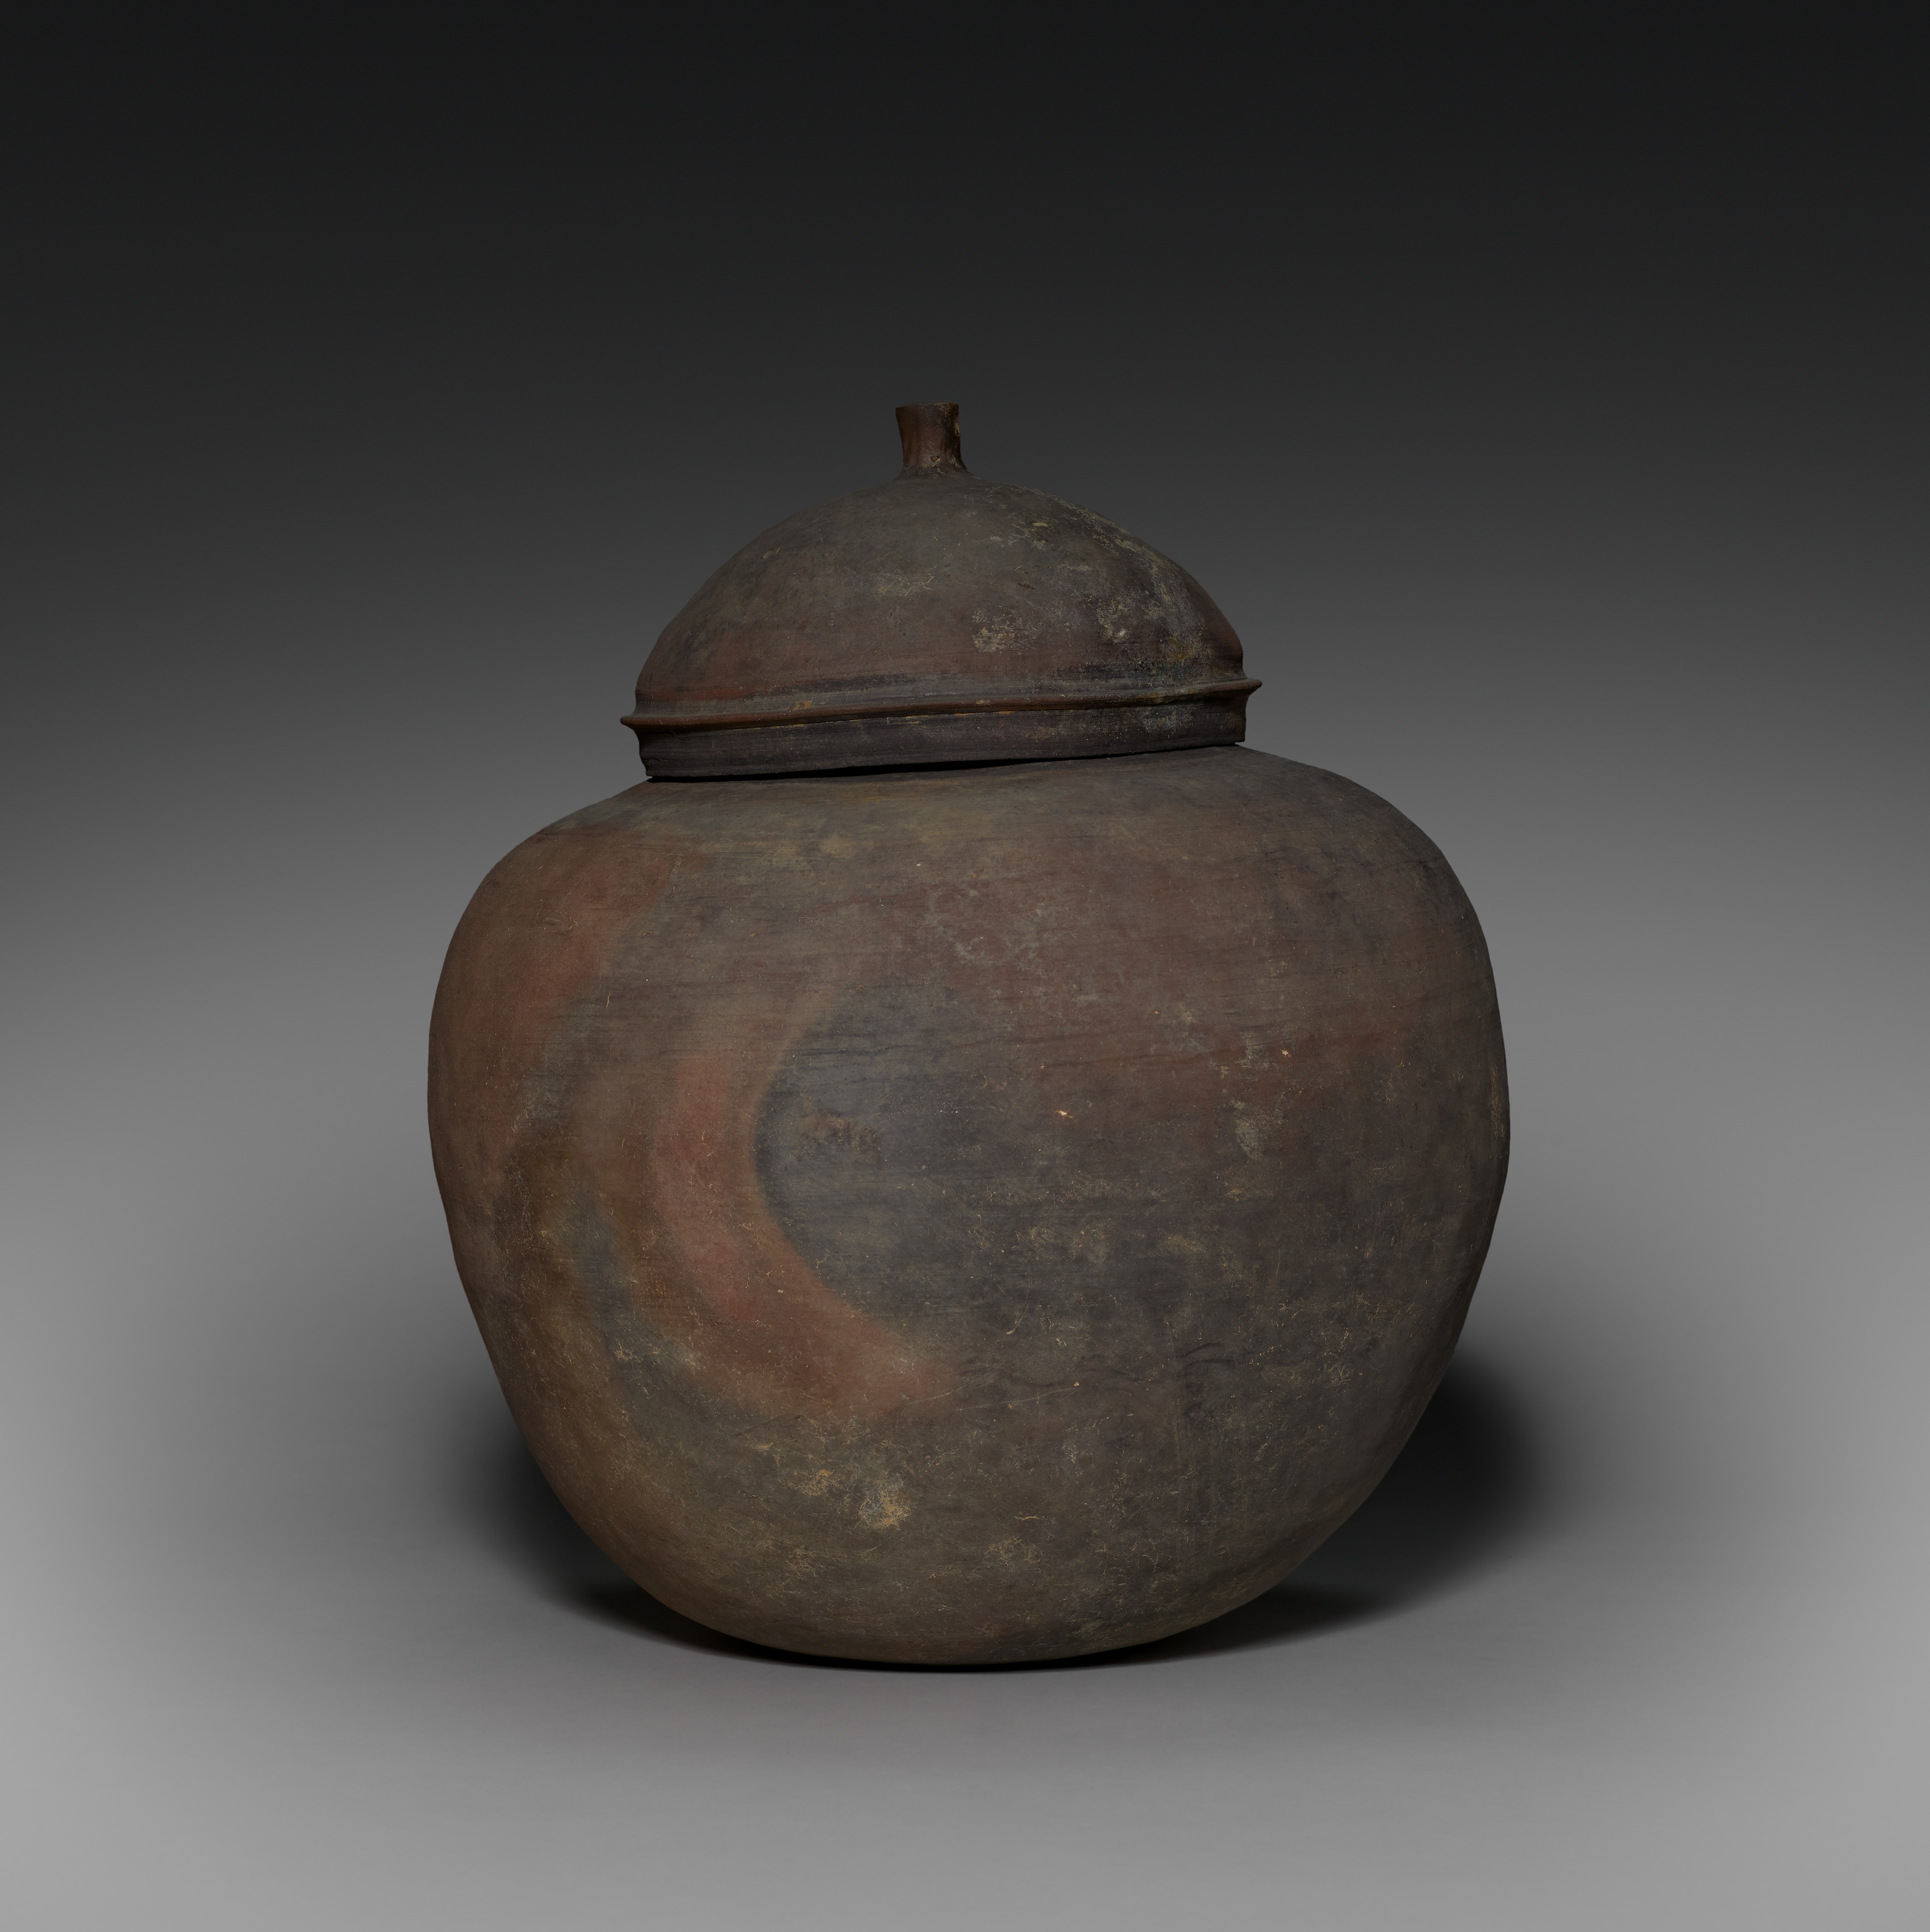 Vessel with Knobbed Lid